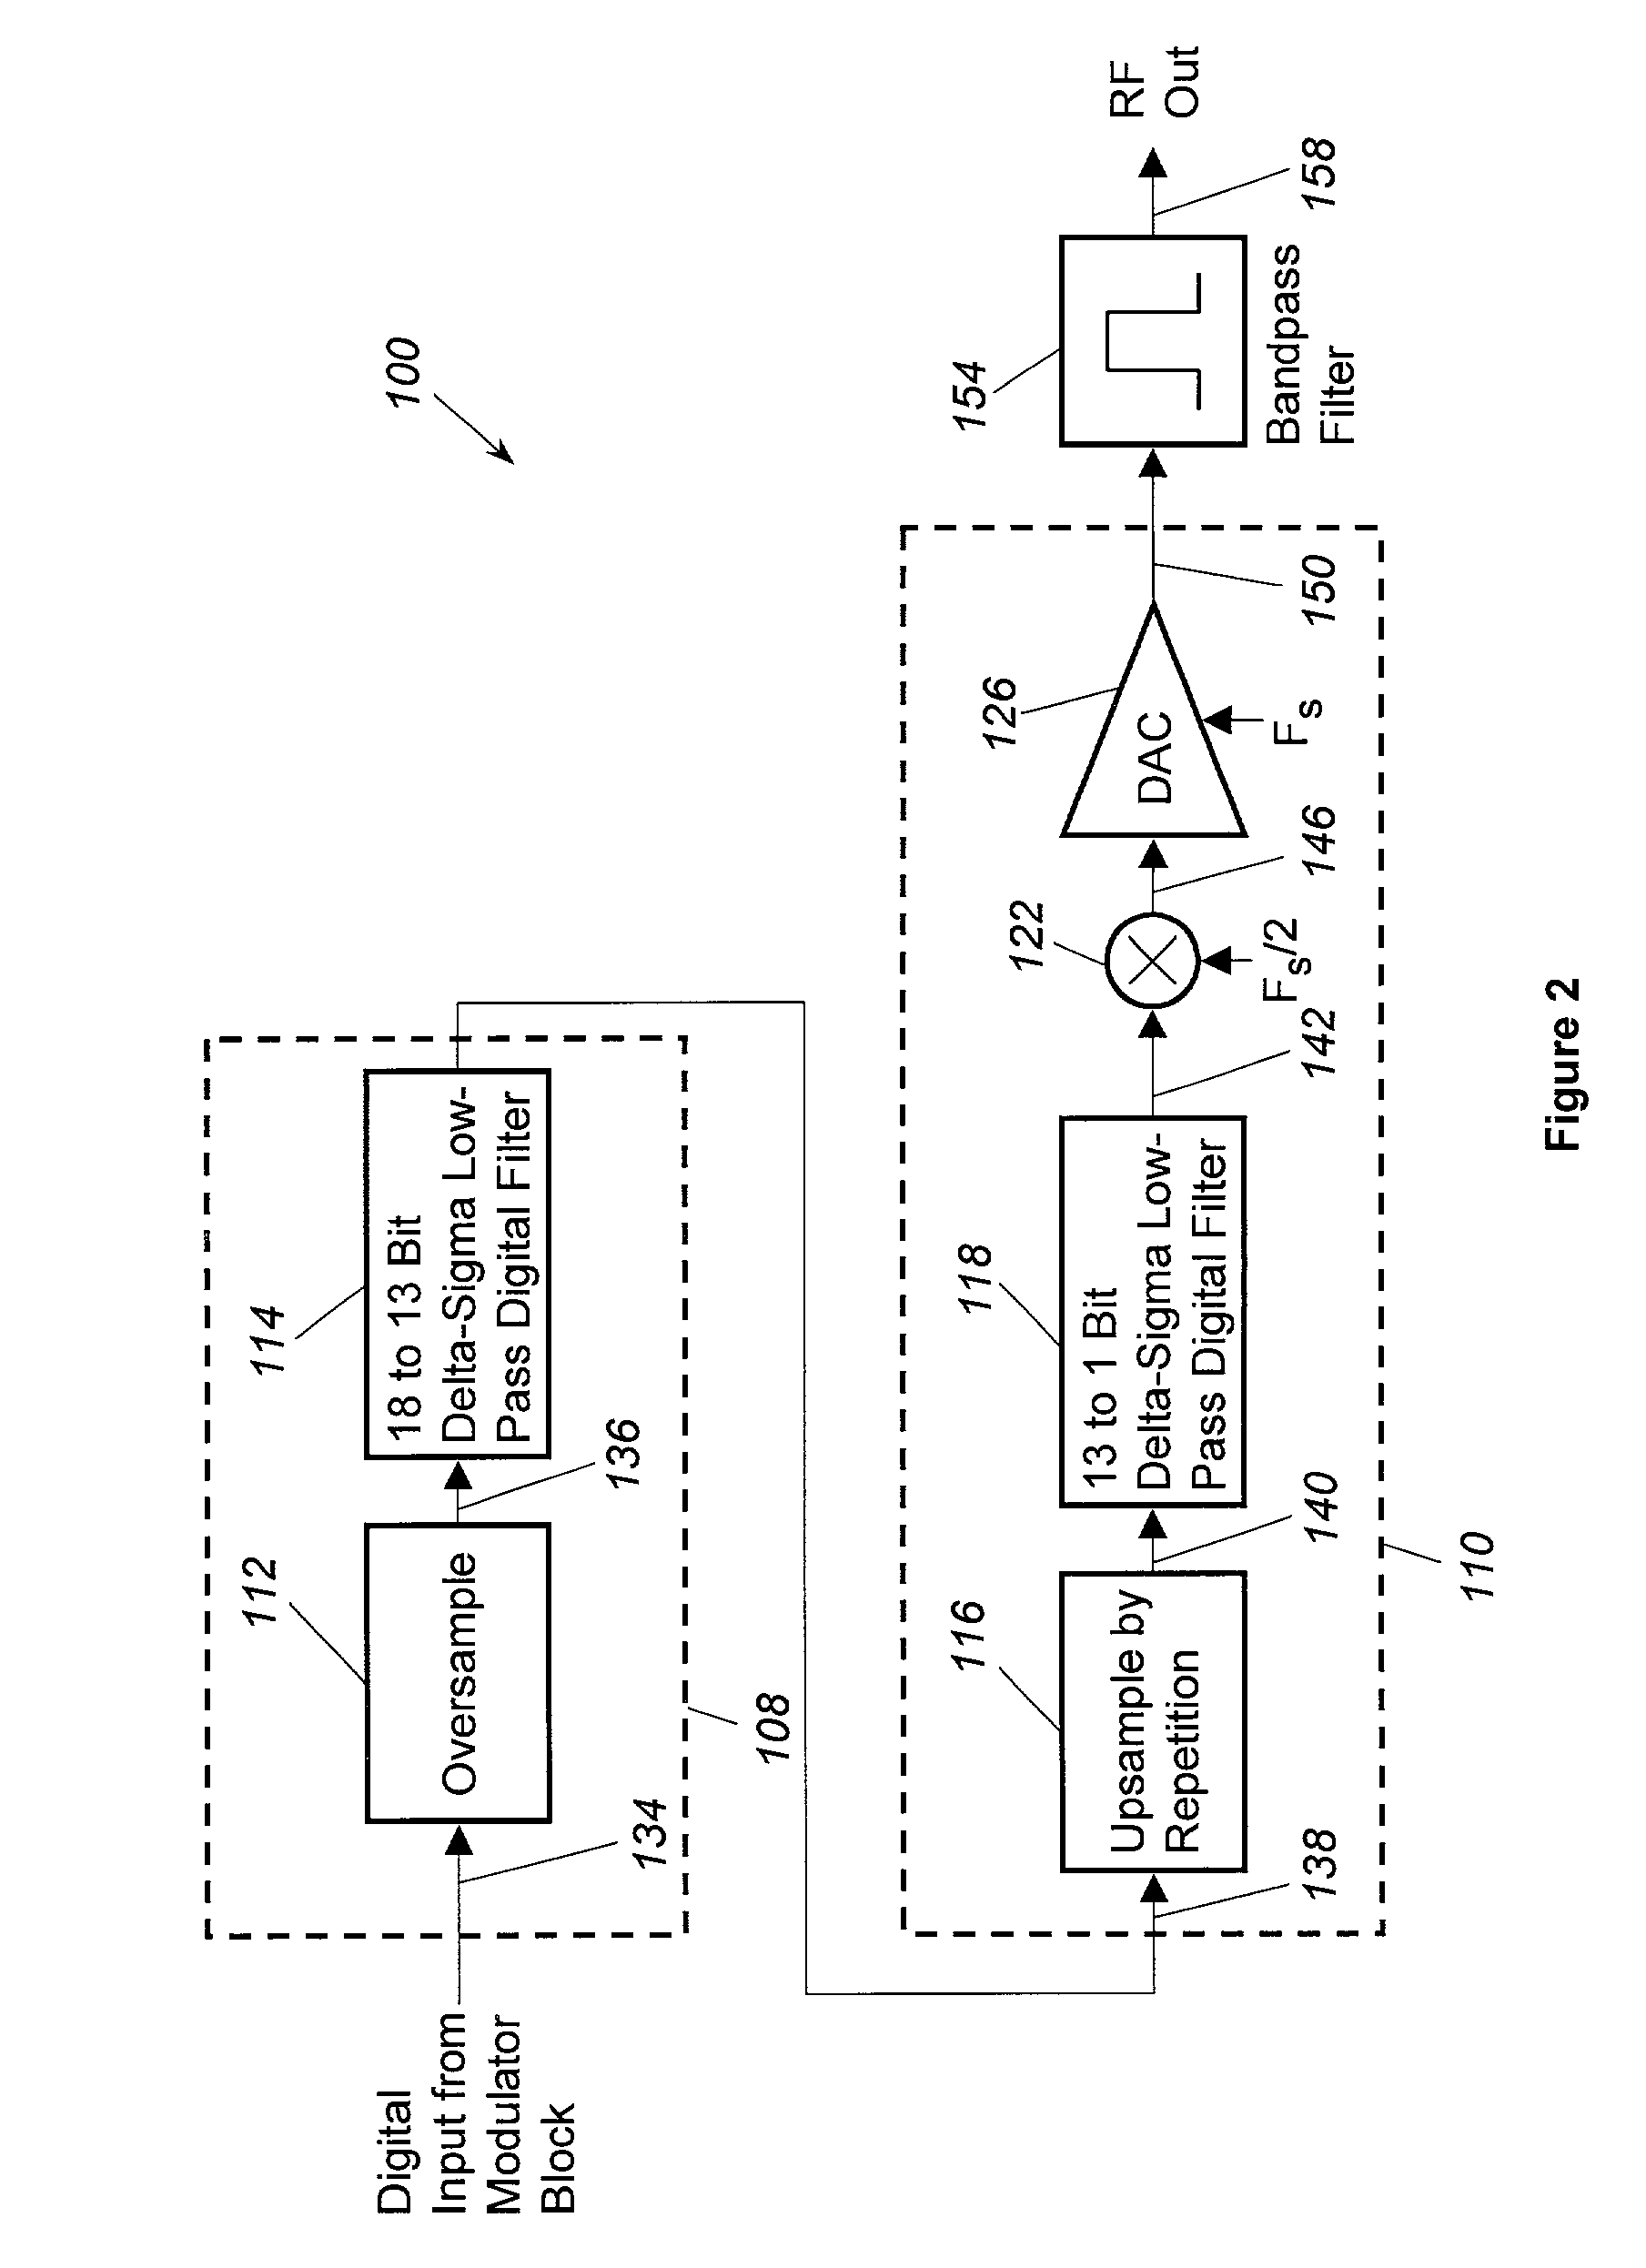 Apparatus and methods for digital-to-analog conversion